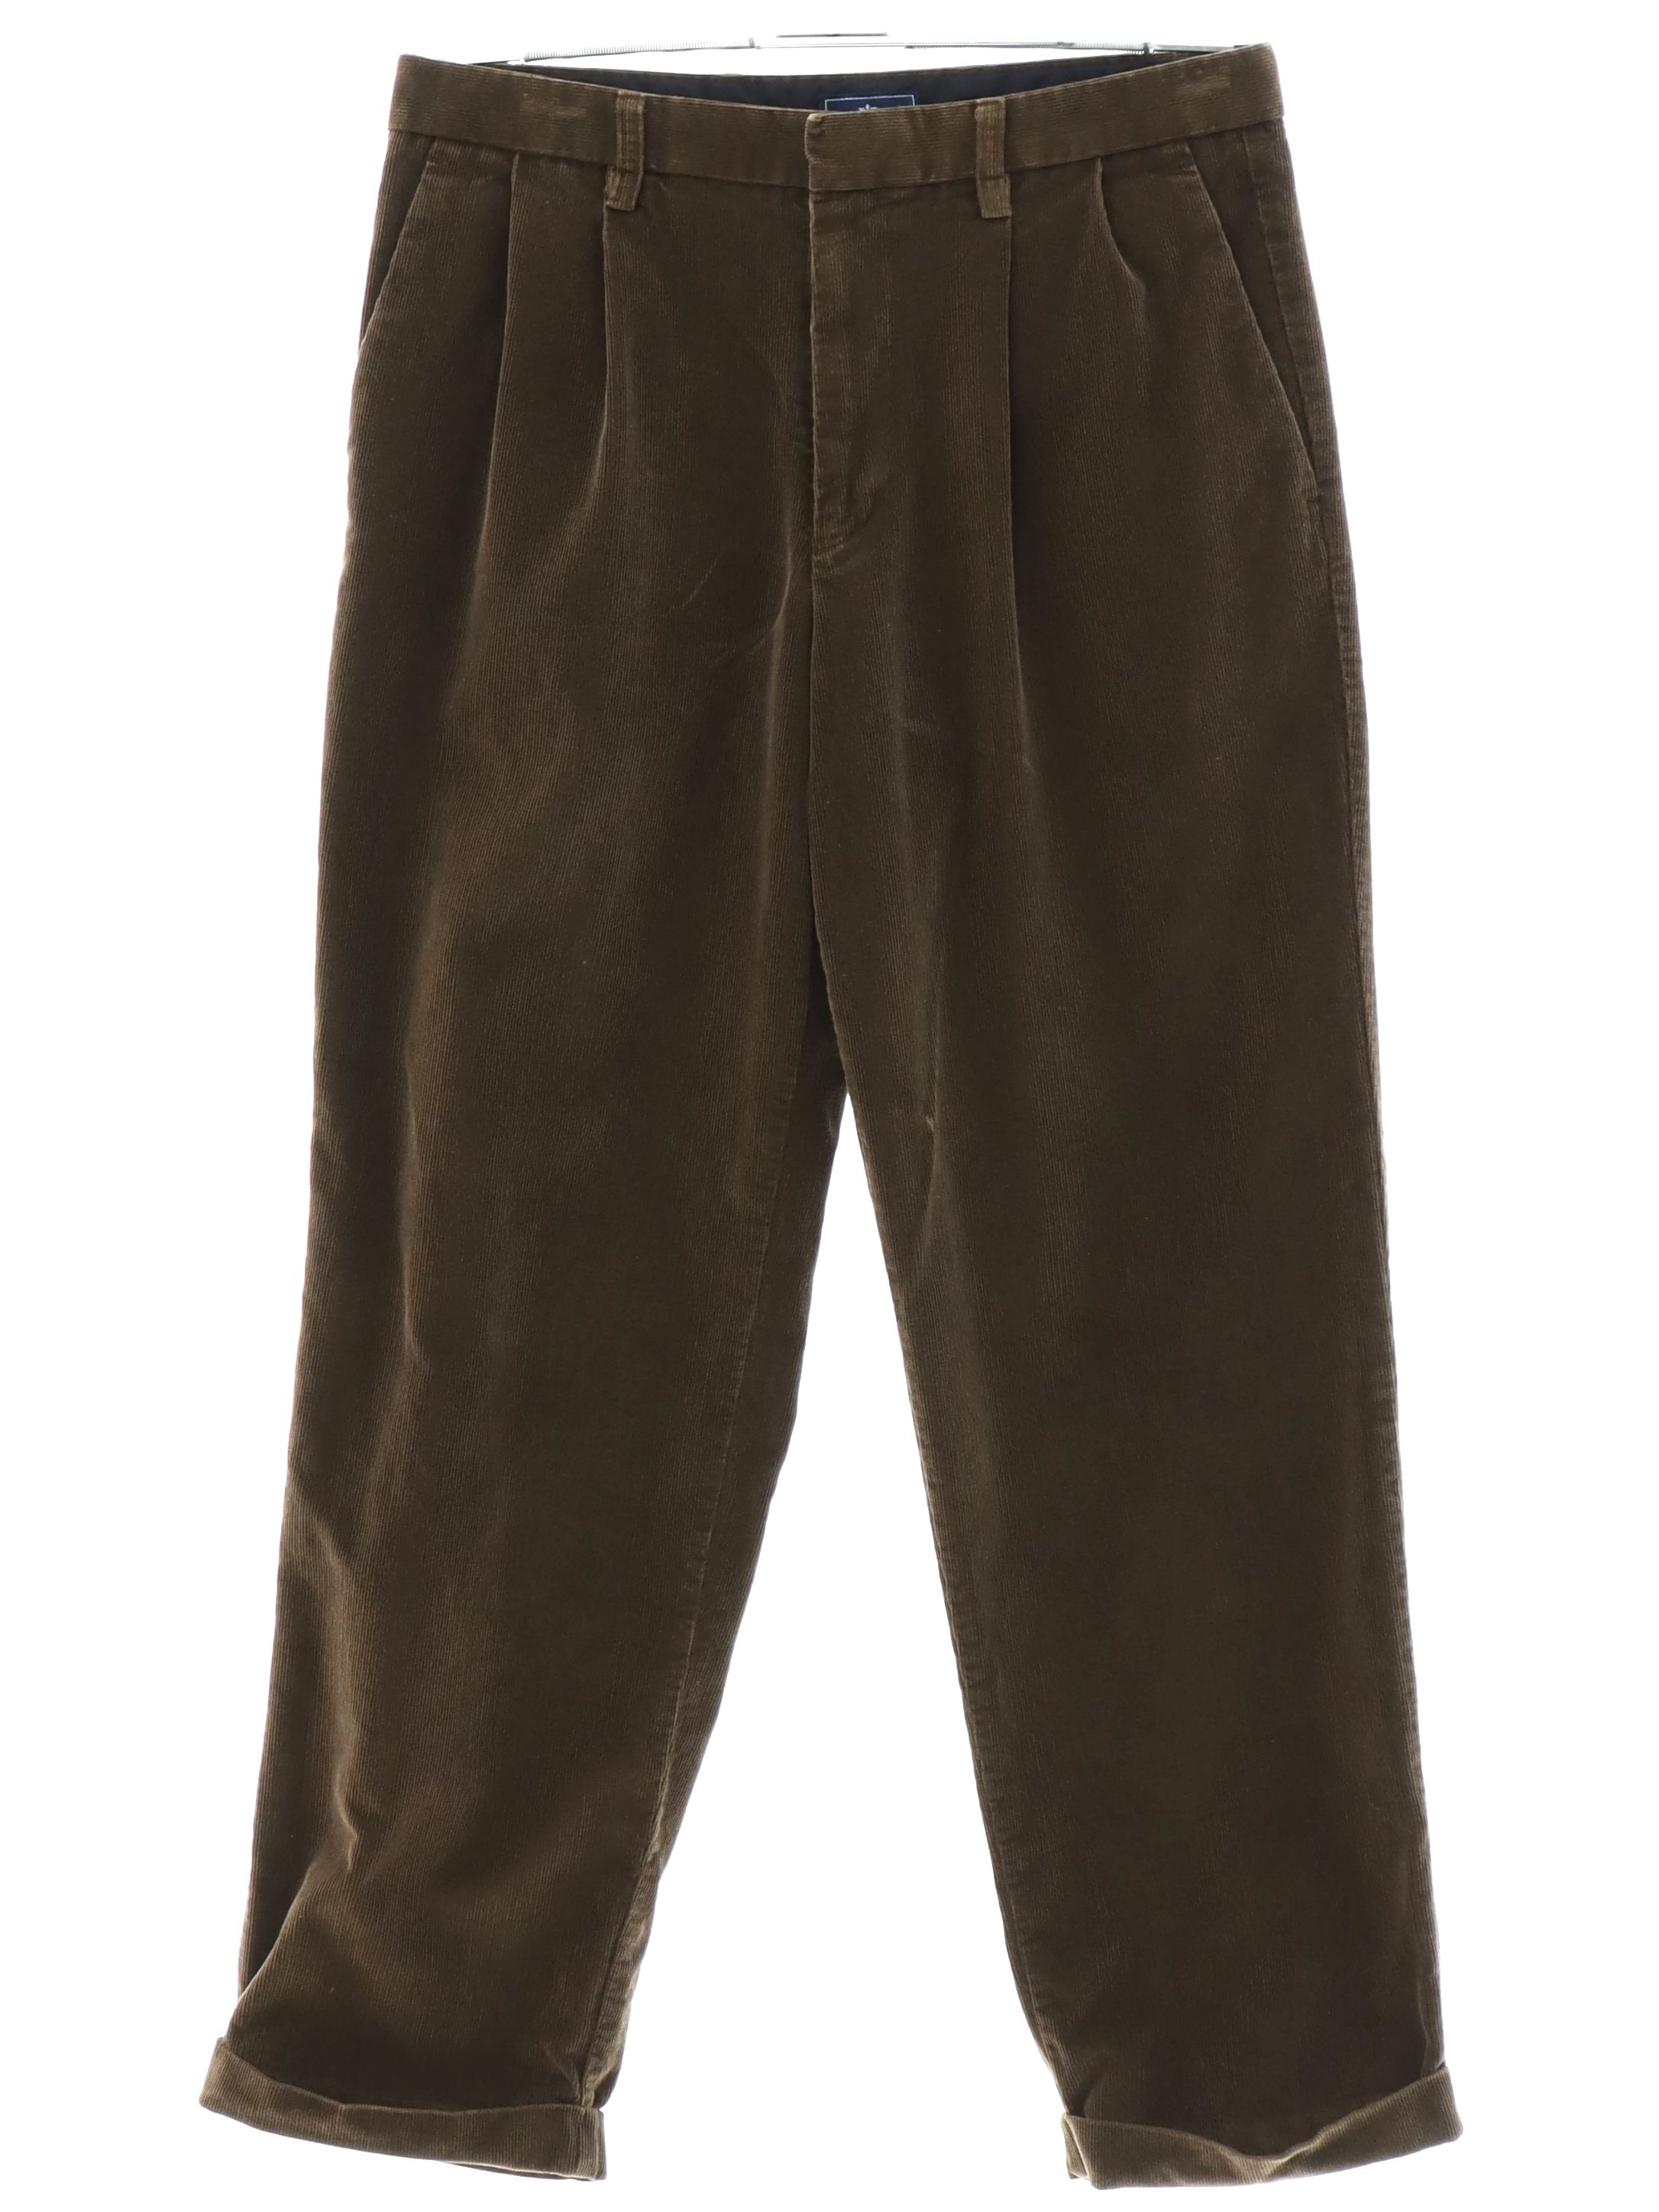 Pants: 90s -Dockers- Mens brown solid colored cotton corduroy pleated ...